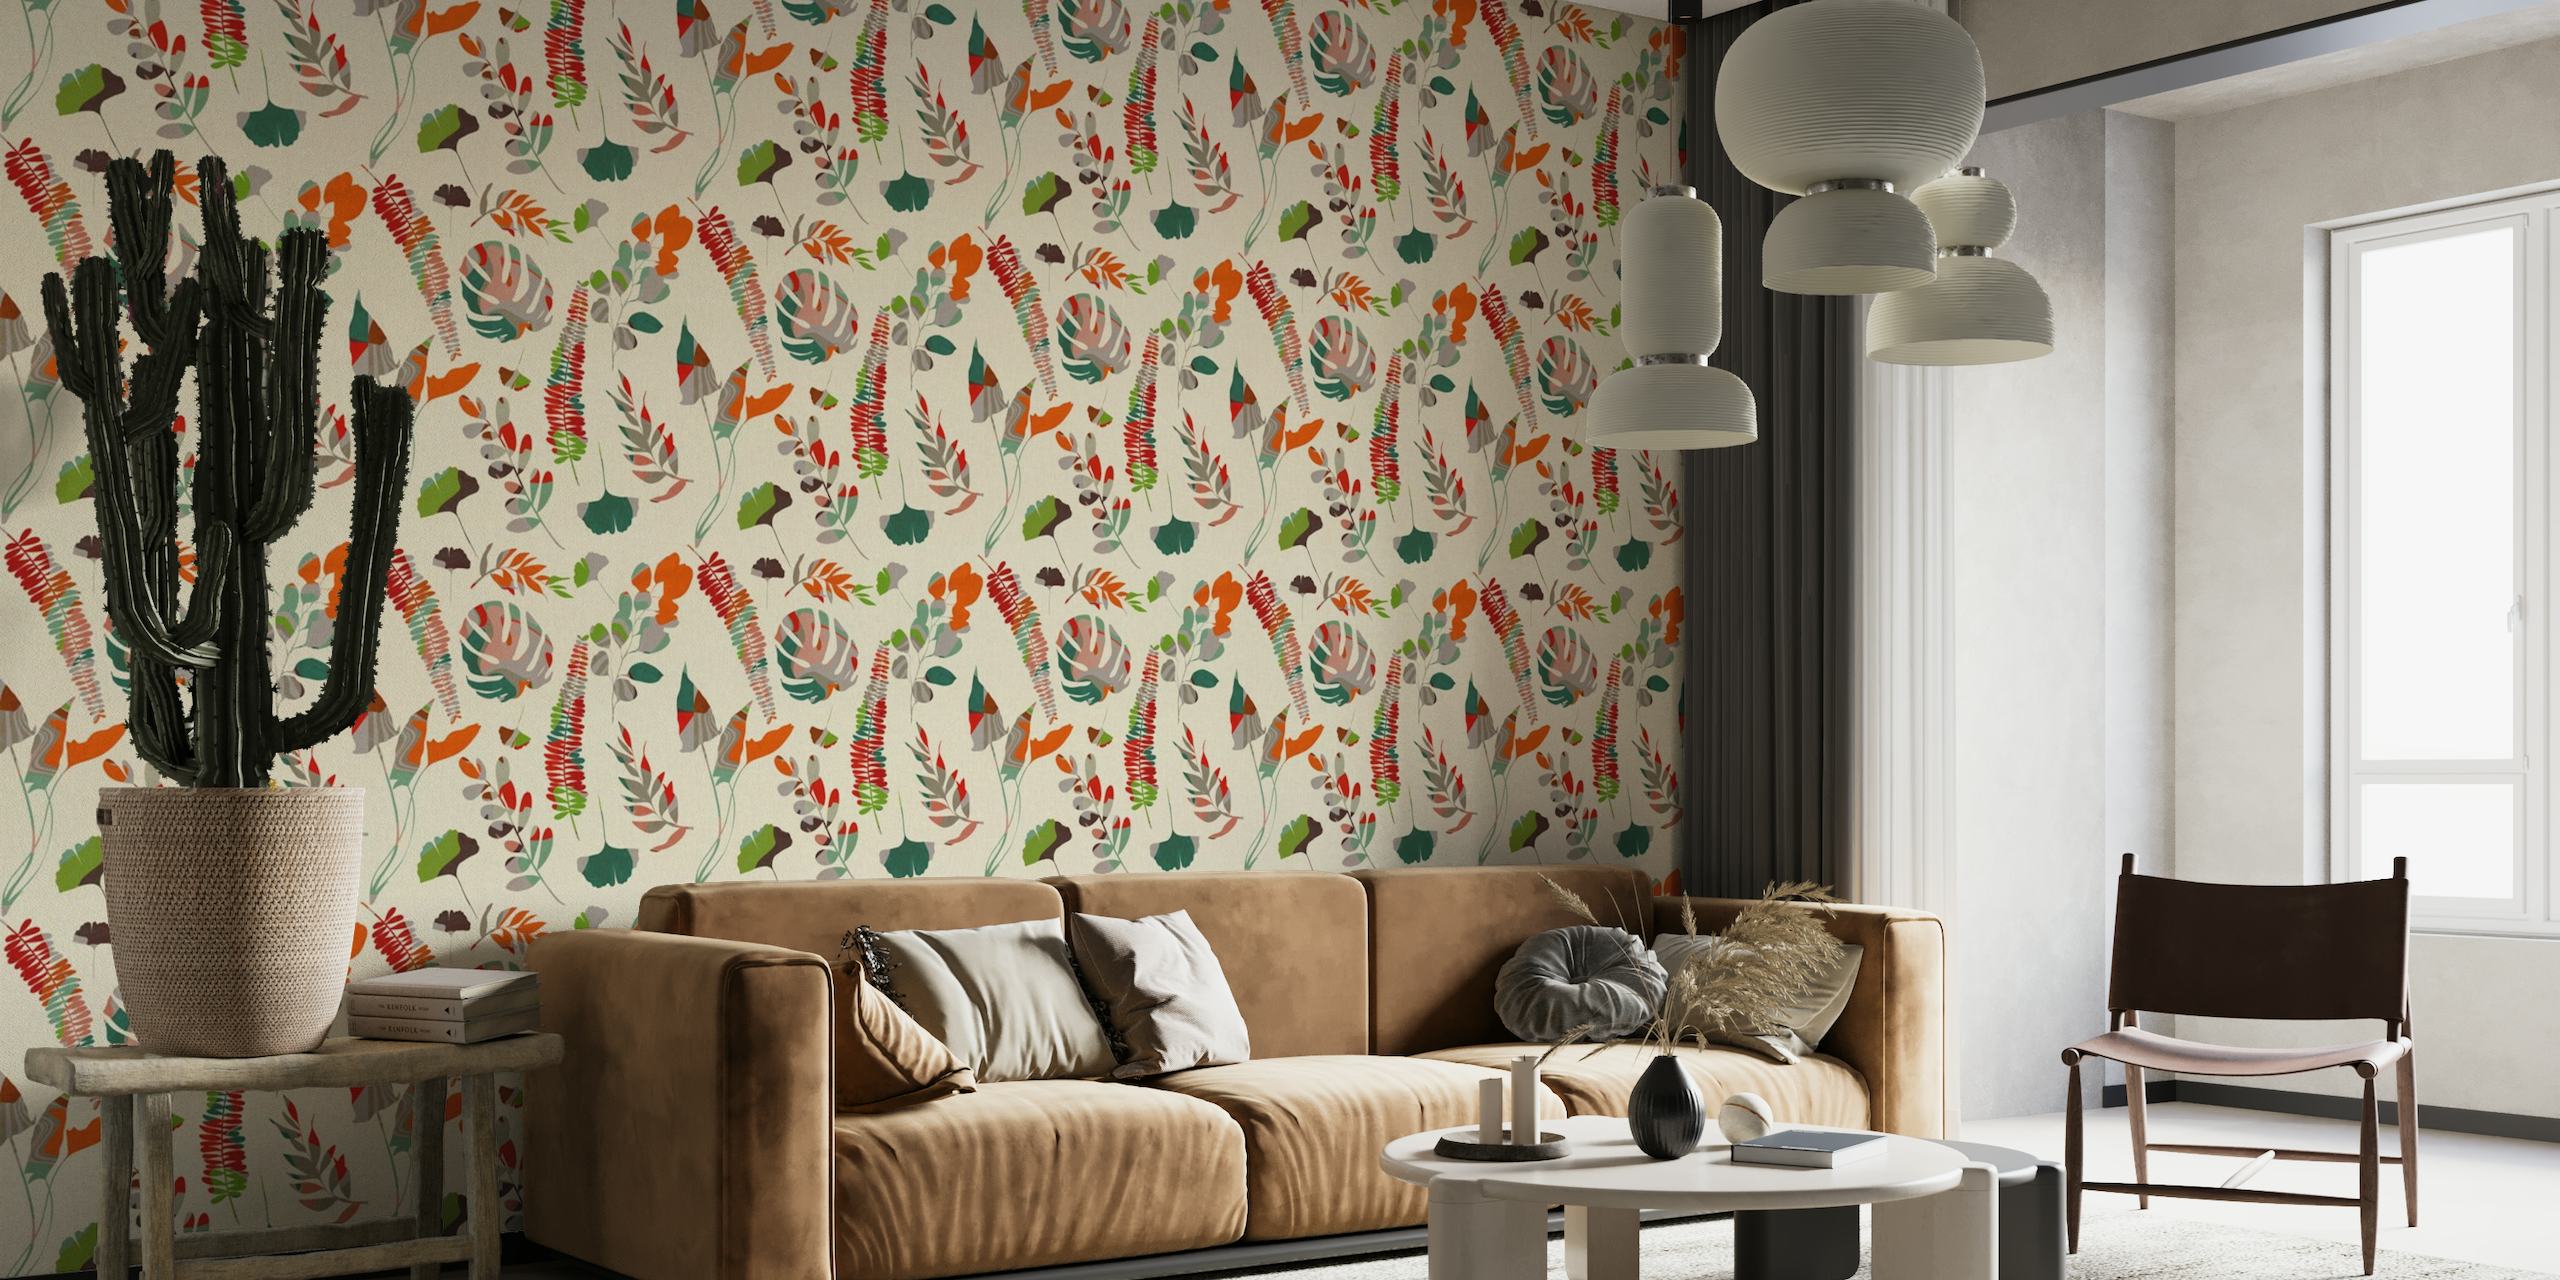 Jungle leaves pattern with red behang